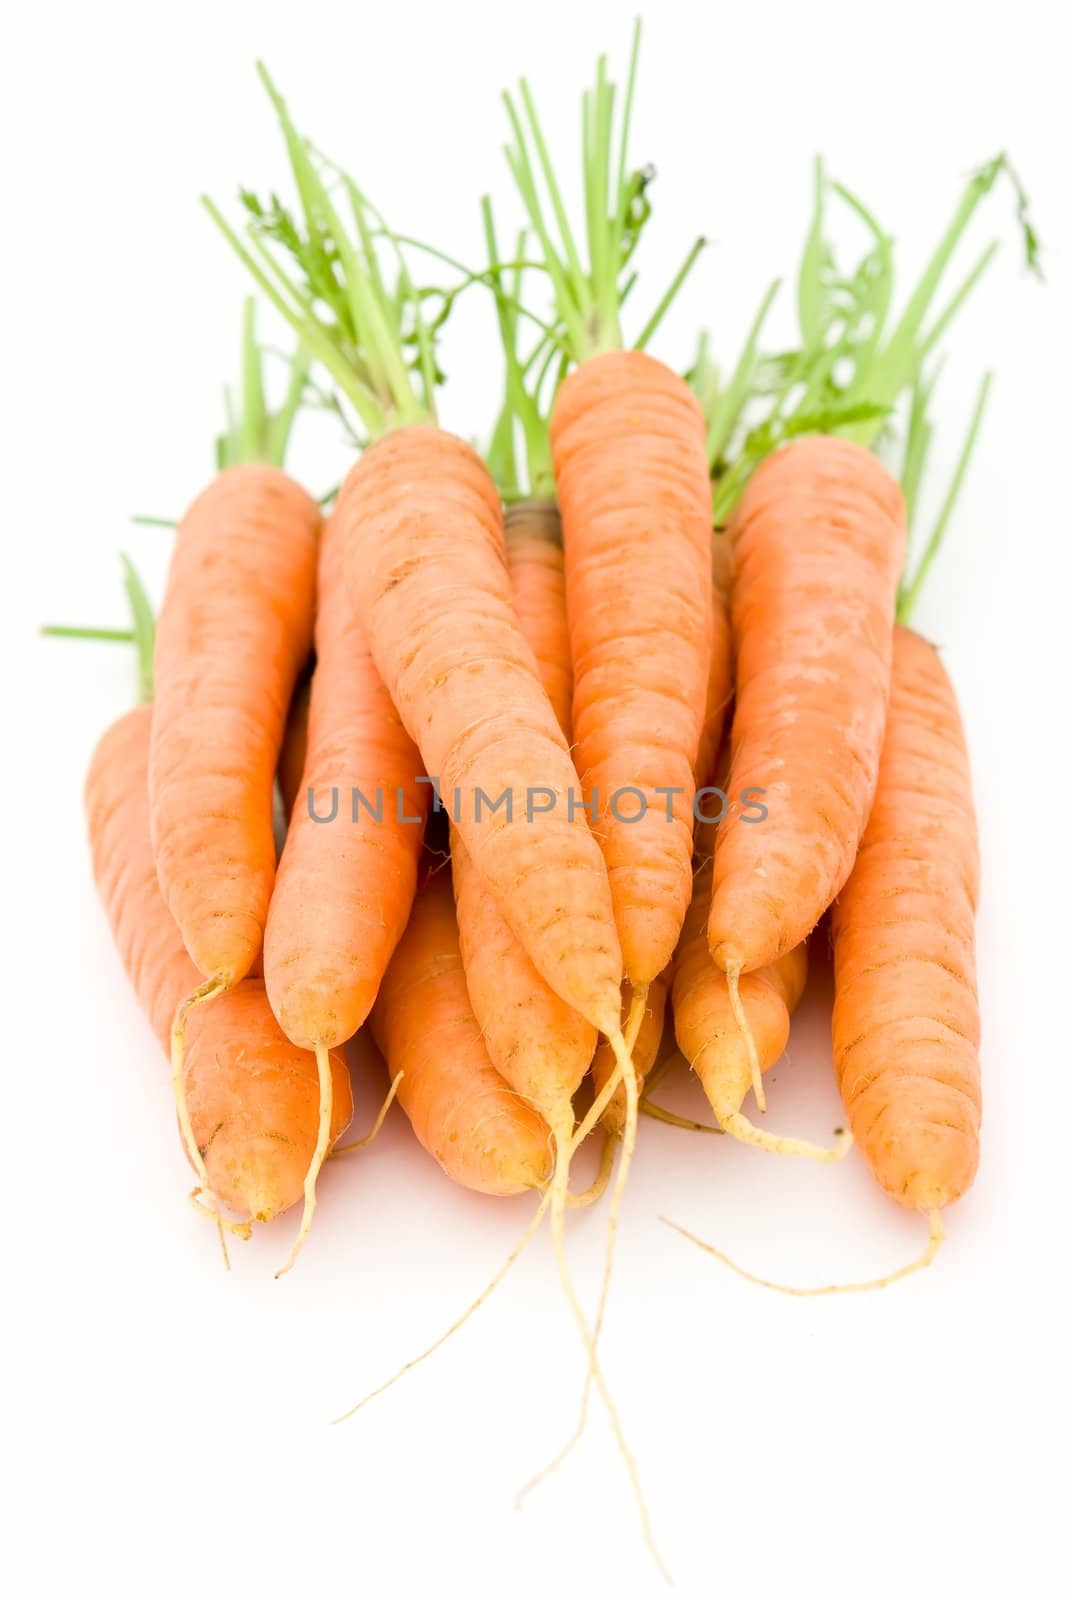 Much fresh carrots on a white background